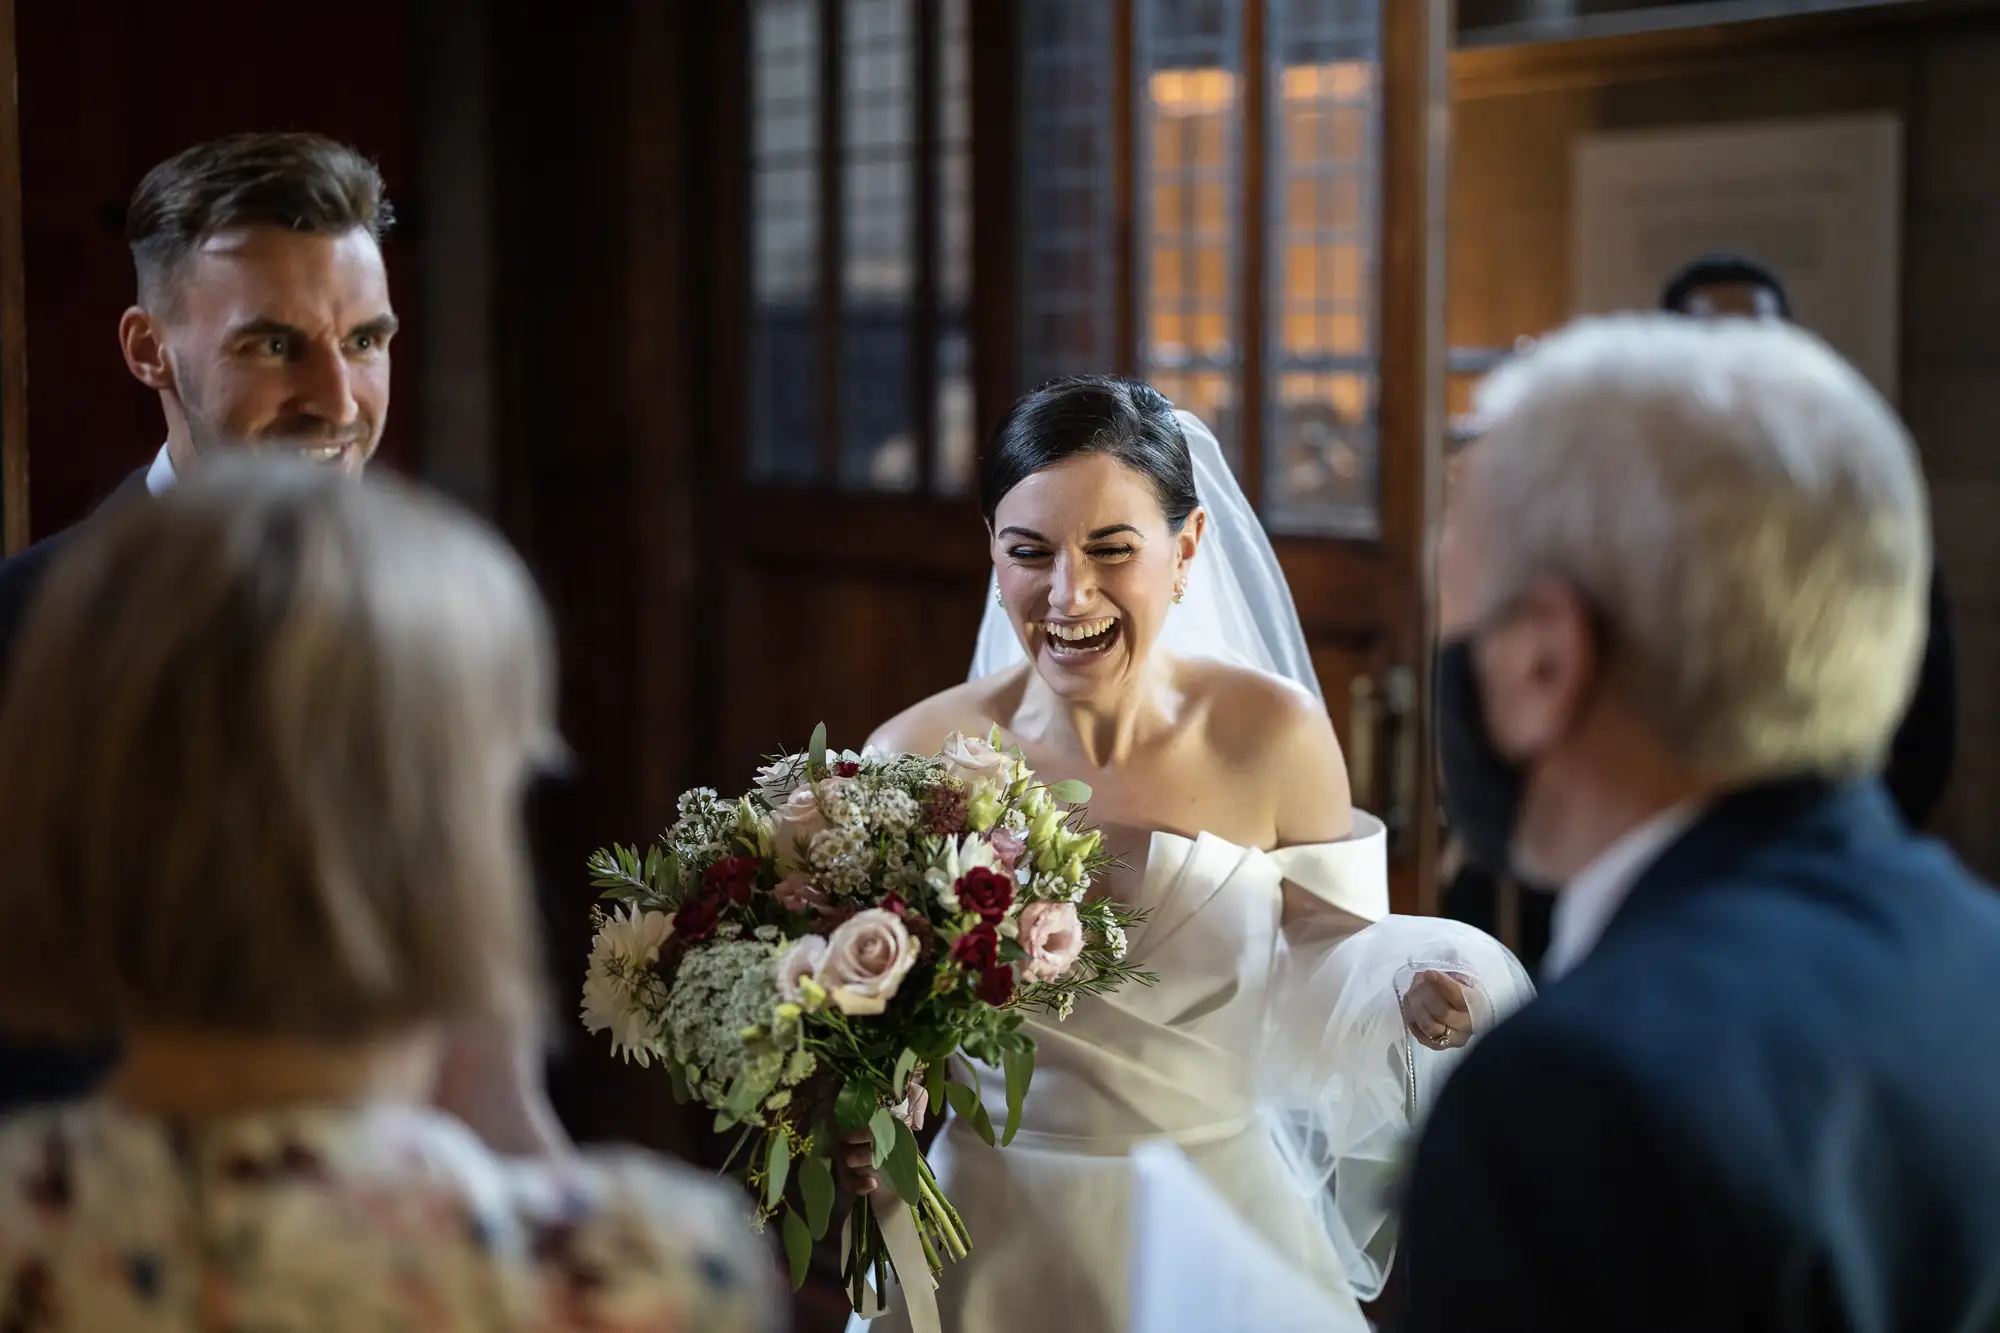 A bride laughing joyfully, holding a bouquet, with a groom and guests around her during a wedding ceremony indoors.